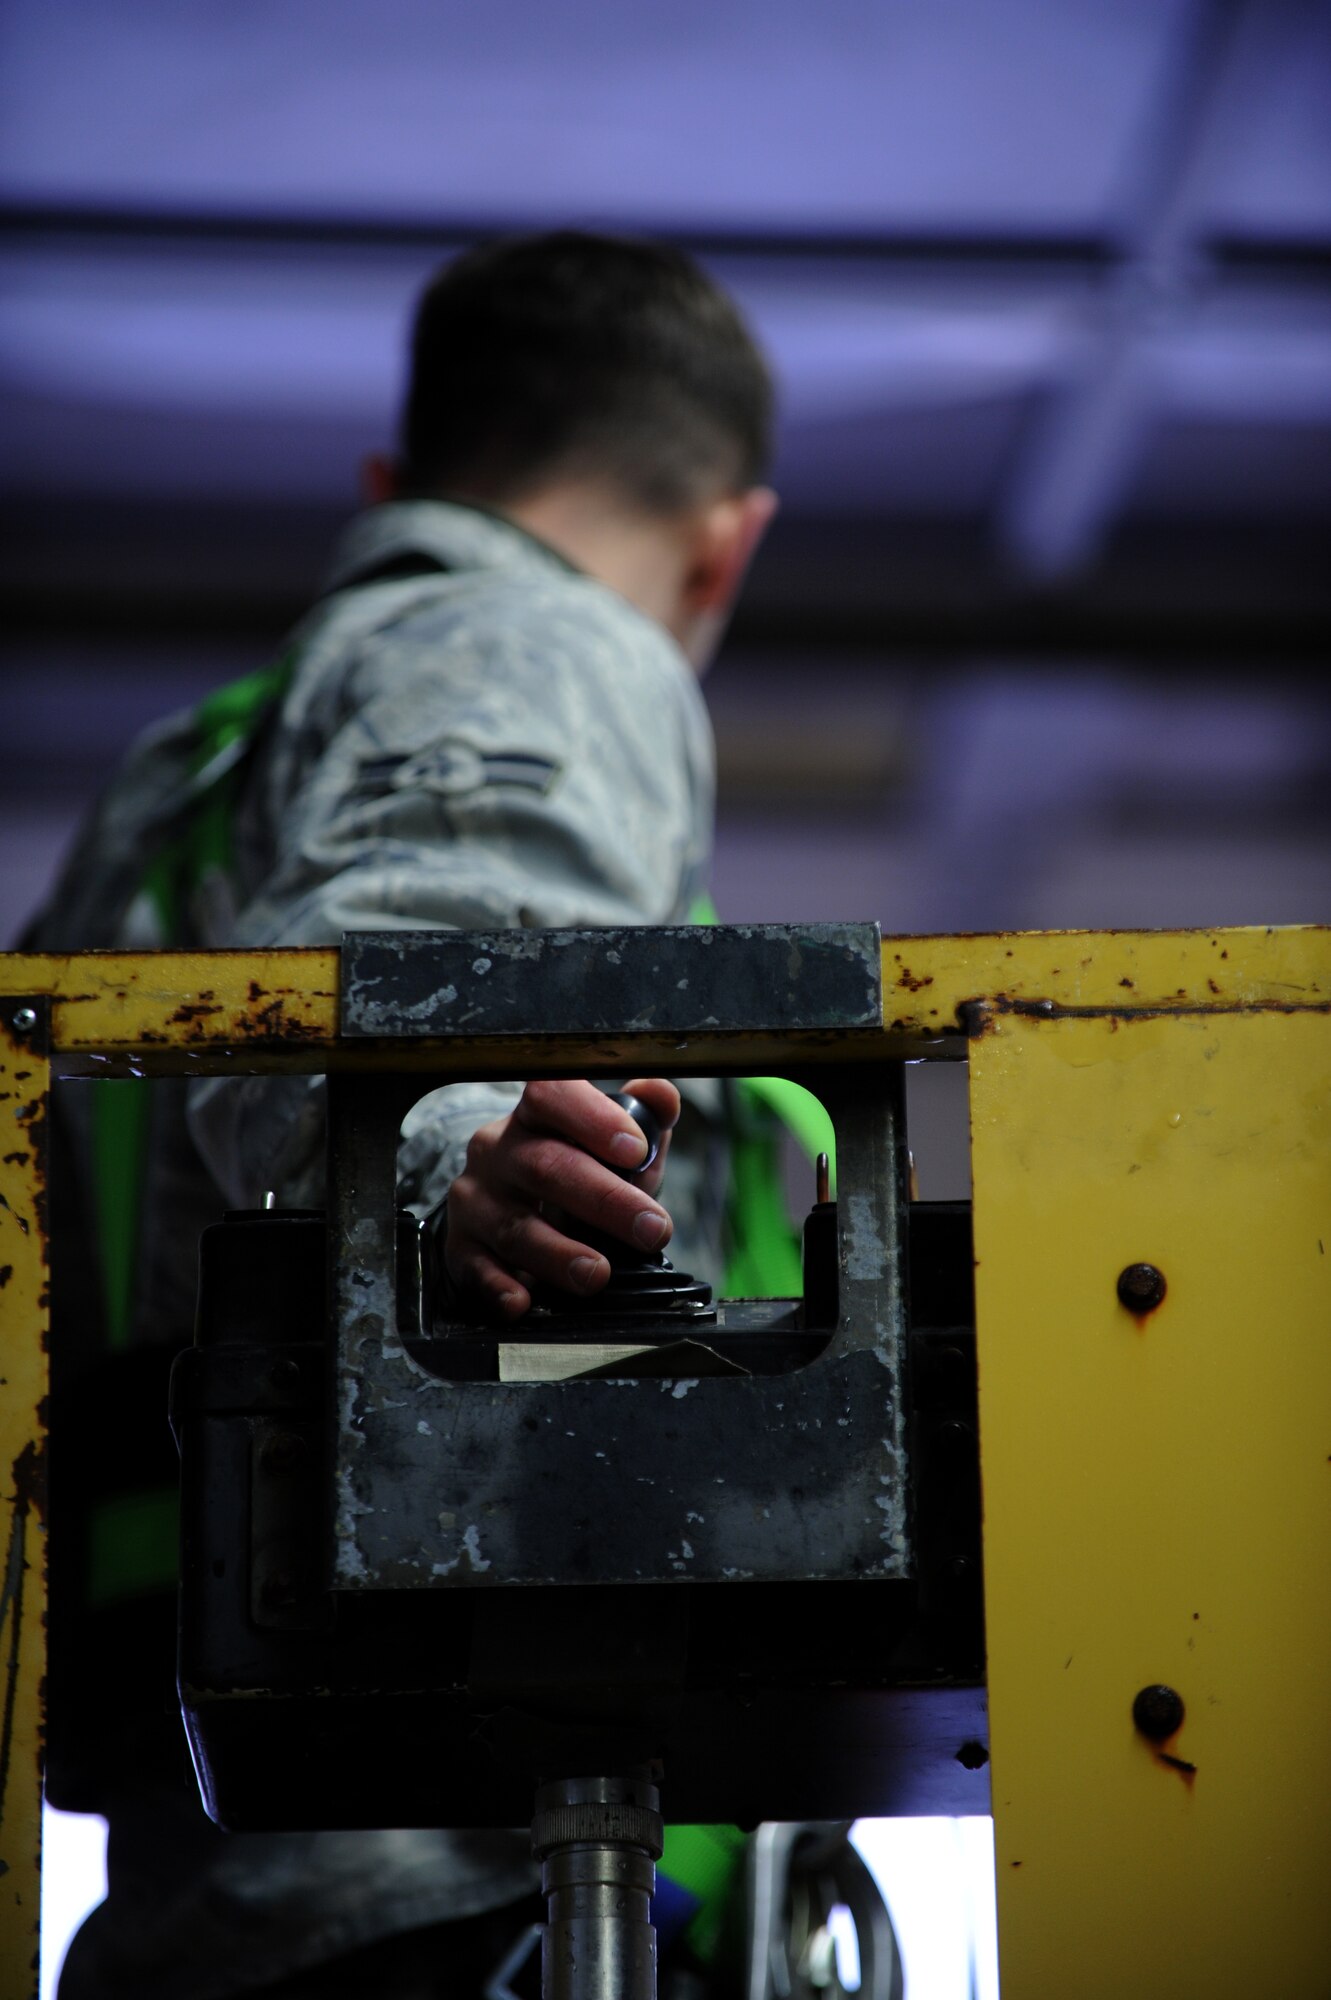 SPANGDAHLEM AIR BASE, Germany – Airman 1st Class Troy Heirling, 52nd Civil Engineer Squadron electrical-systems apprentice, operates a lift after removing a damaged fire detector in bldg 189 here Nov. 28. The alarm shop is responsible for maintaining, replacing and monitoring all security and fire-alarm systems on base. (U.S. Air Force photo/Airman 1st Class Matthew B. Fredericks)